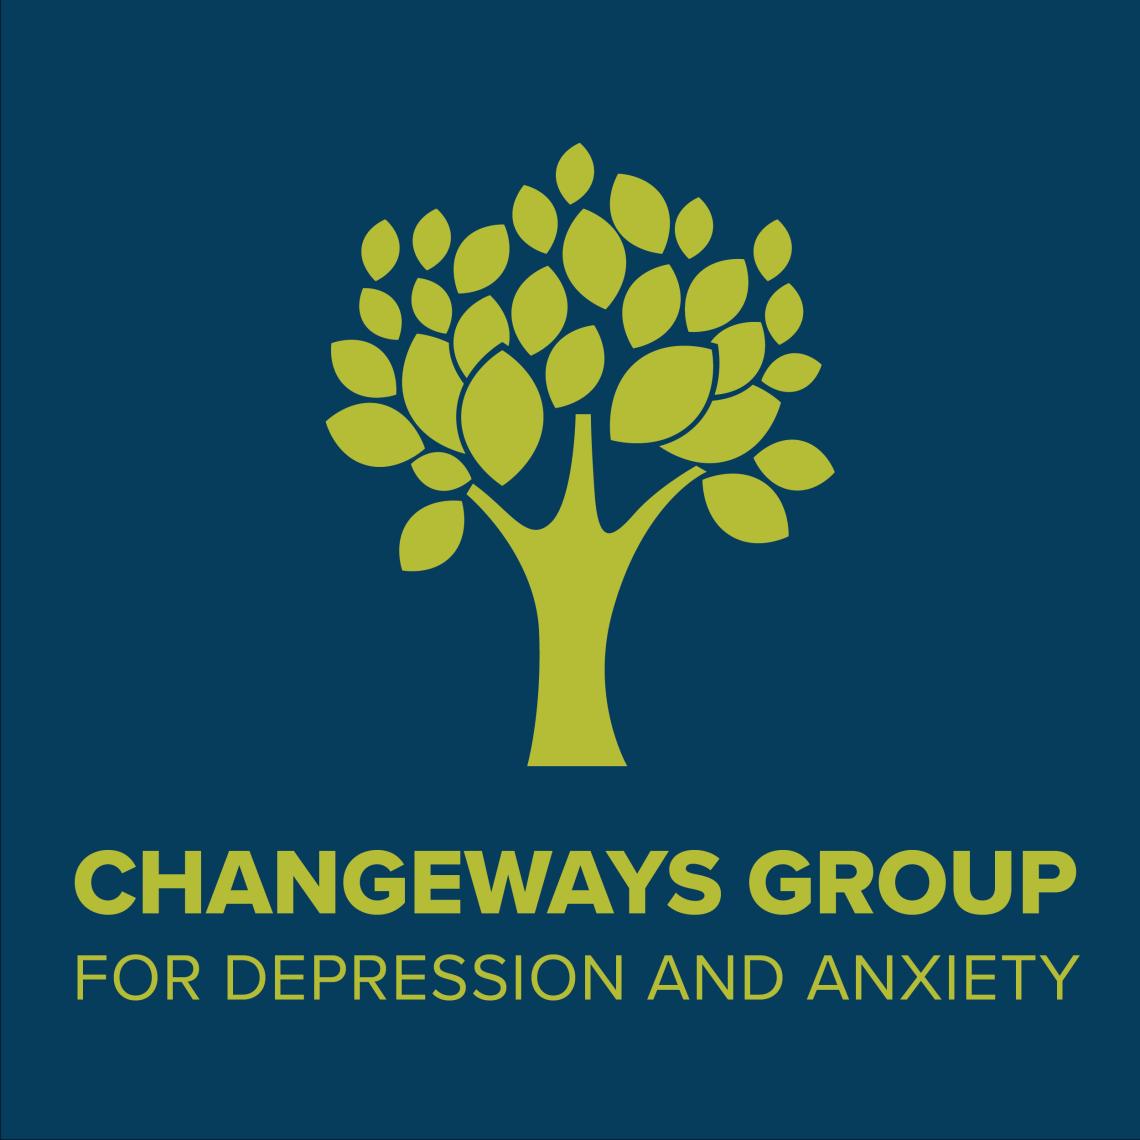 Changeways Group: For Depression and Anxiety